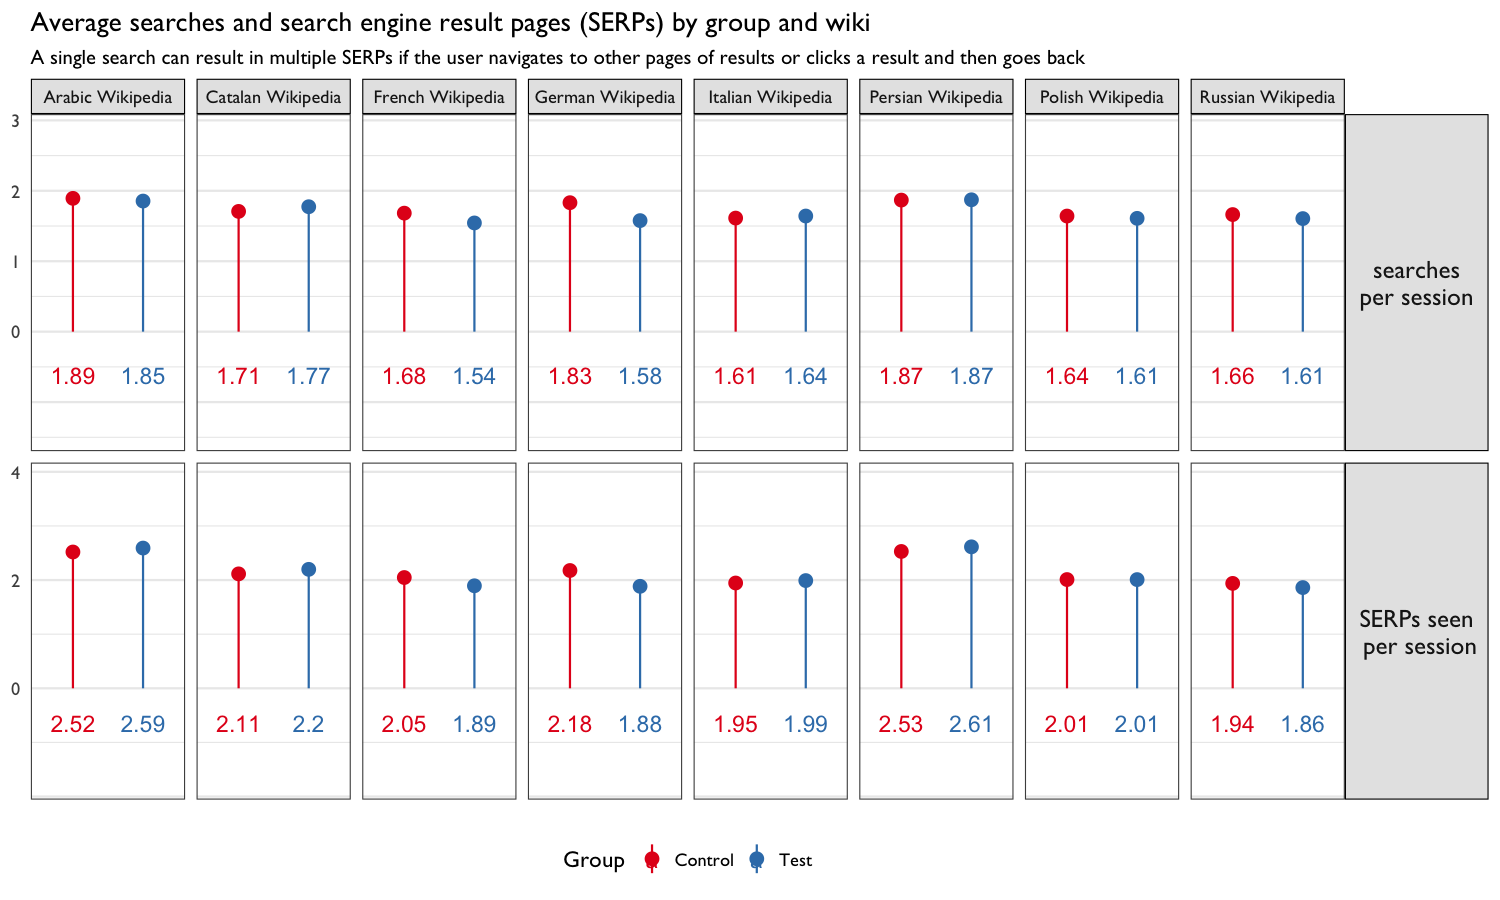 **Figure 5**: Average number of searches, average number of search engine result pages (SERPs), total searches, total SERPs, and total sessions by group and wiki. The groups did not appear to behave too differently. For example, the two groups had very similar average searches per user.